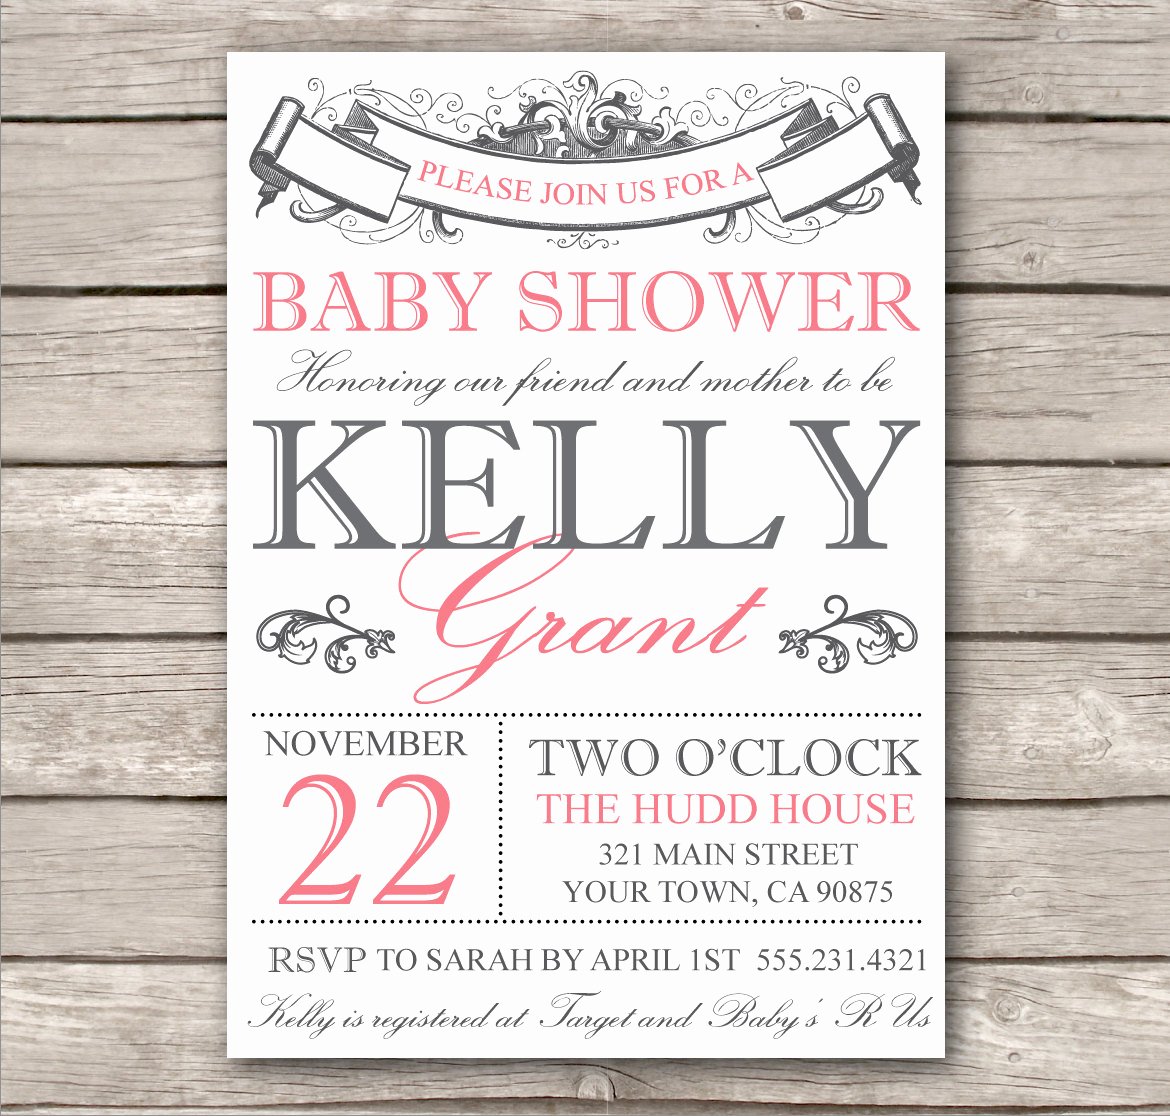 Bridal Shower Invitation or Baby Shower Invitation by